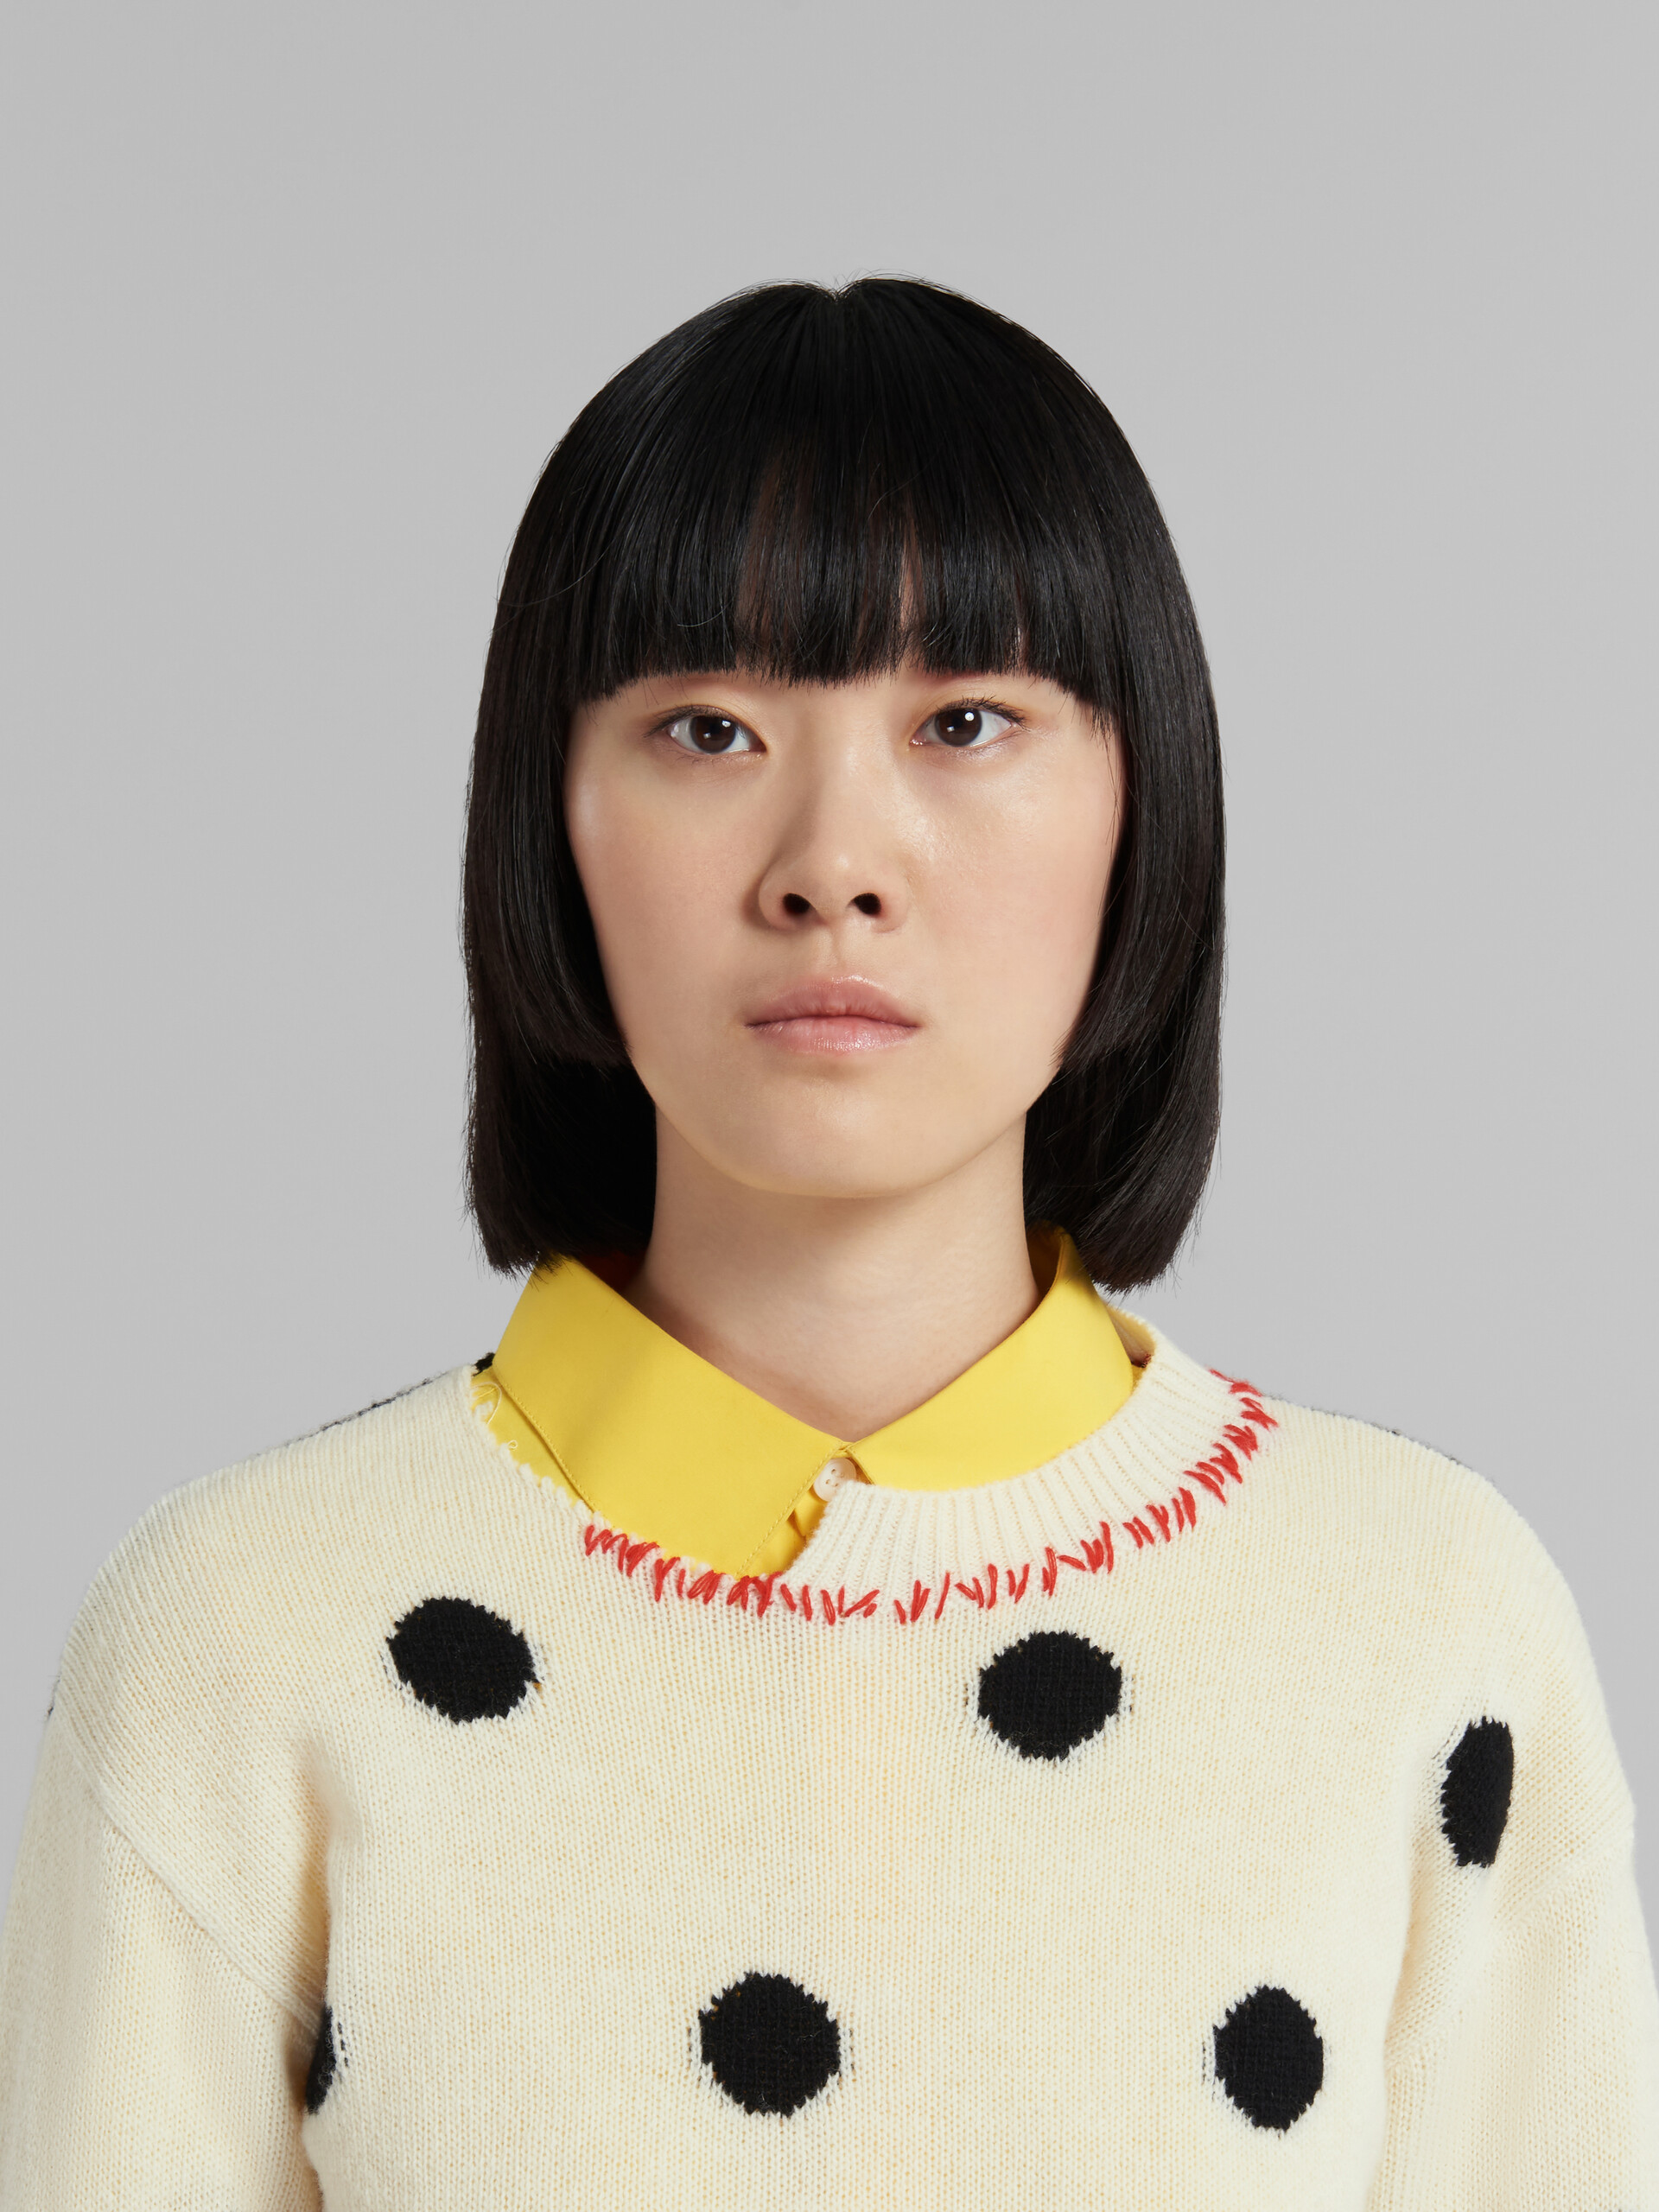 White wool jumper with polka dots - Pullovers - Image 4